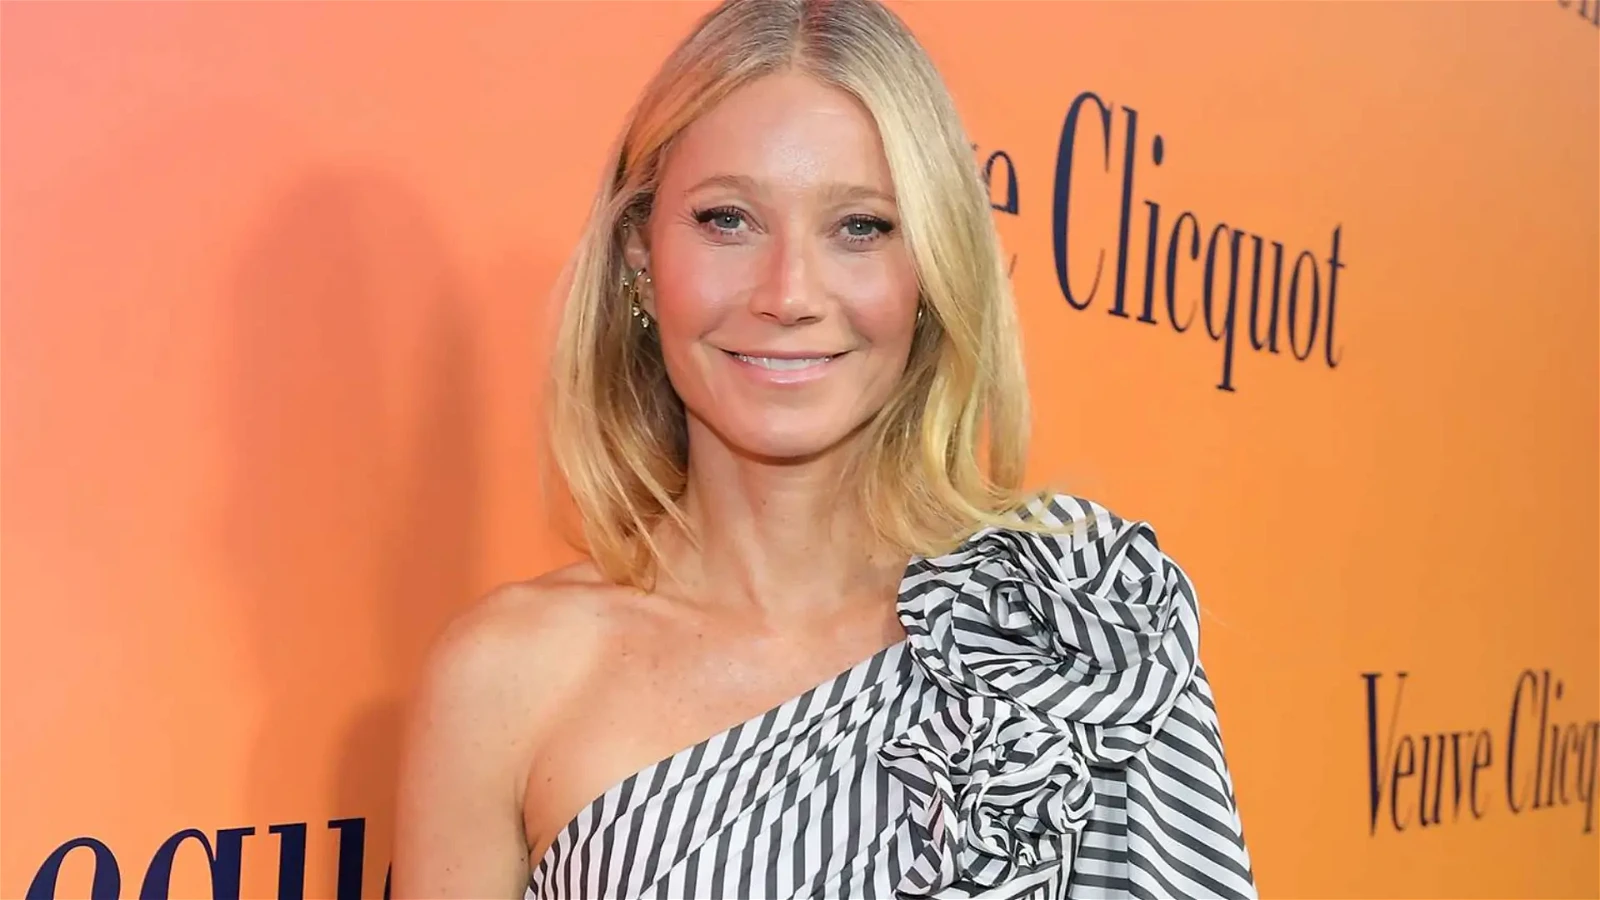 Gwyneth Paltrow is a very controversial businesswoman